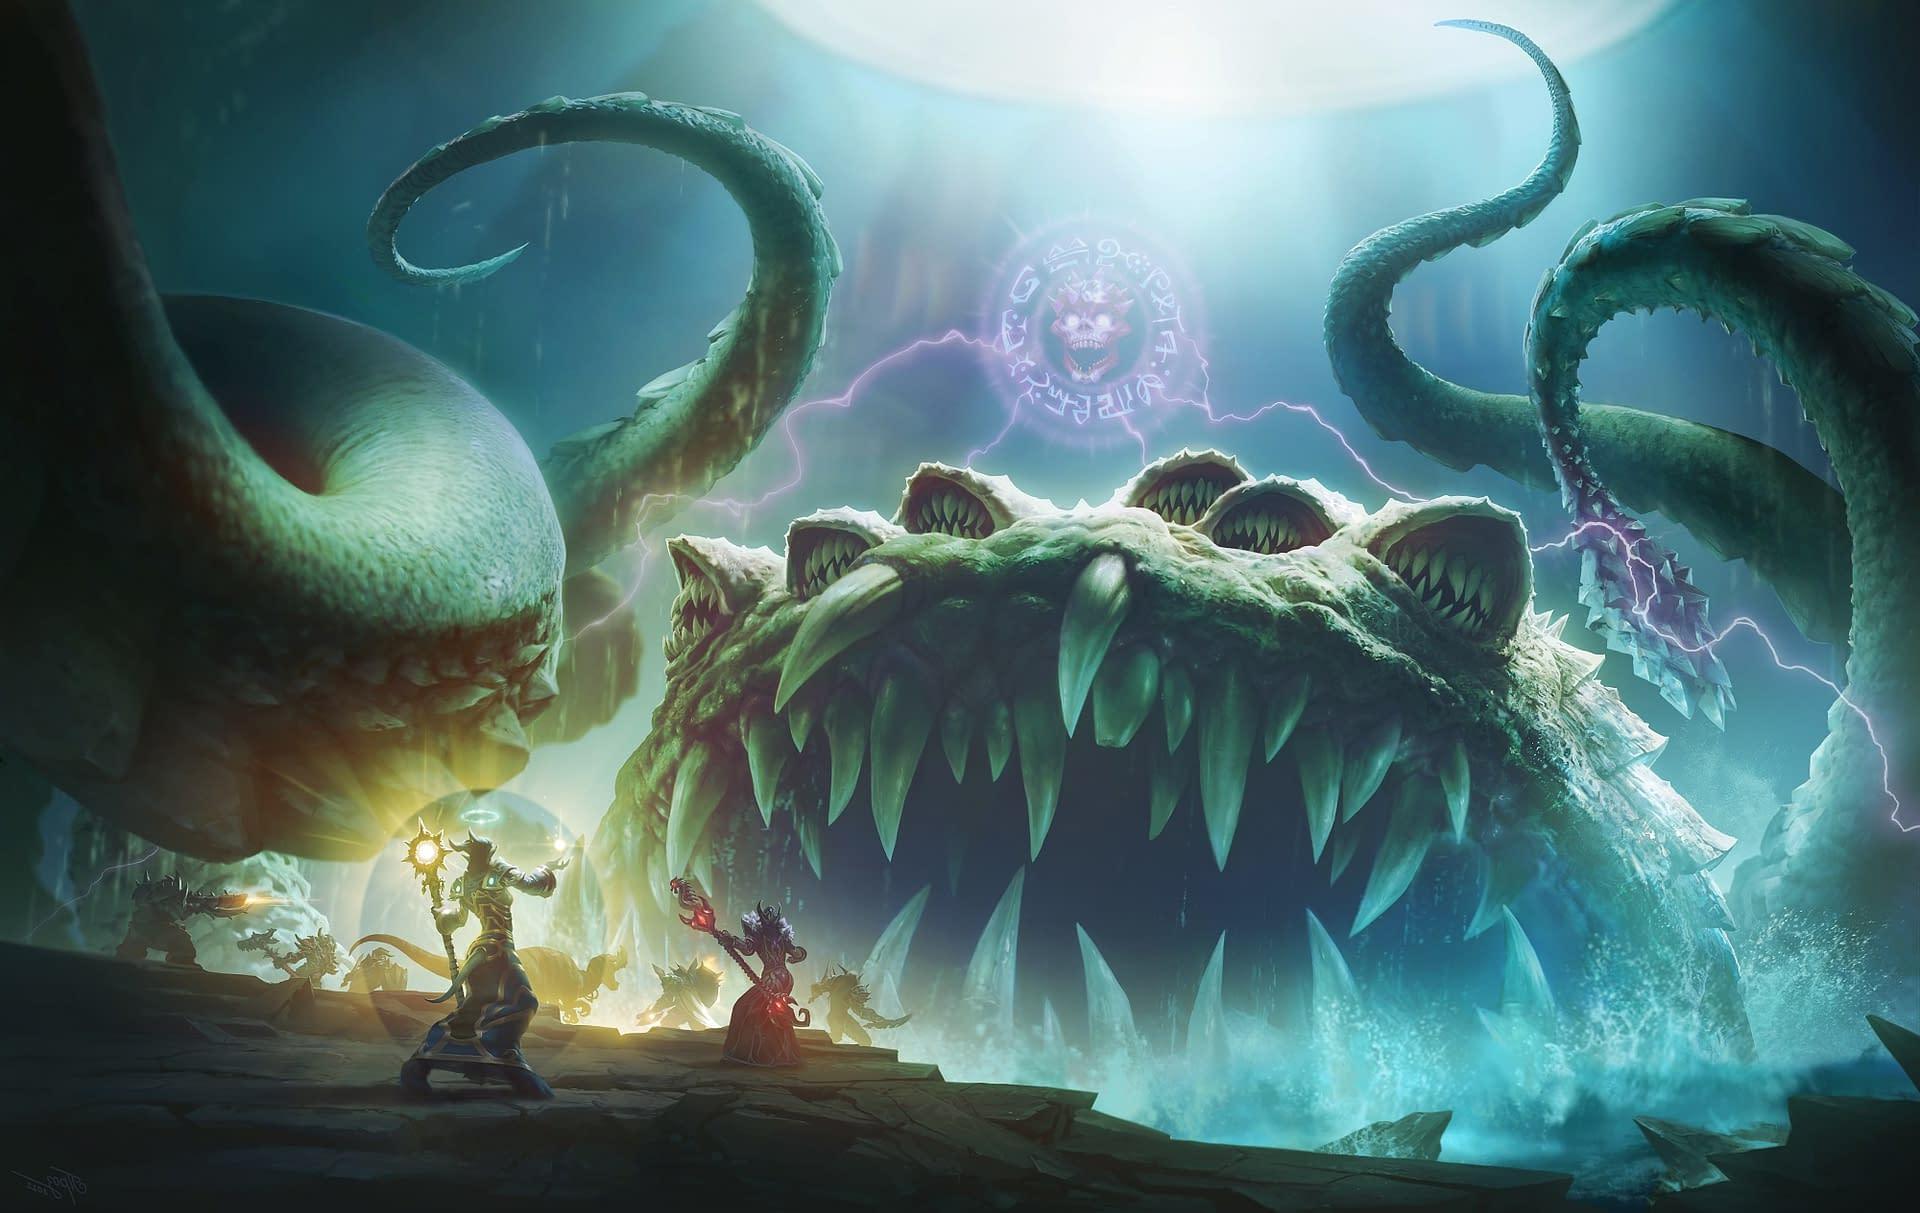 Blizzard Entertainment has brought back a epic raid to World Of Warcraft Classic when Secrets Of Ulduar launches for Wrath of the Lich King. This is the raid in all of its glory, set in a slightly modernized version of the Classic run as you can play it like the day it was!